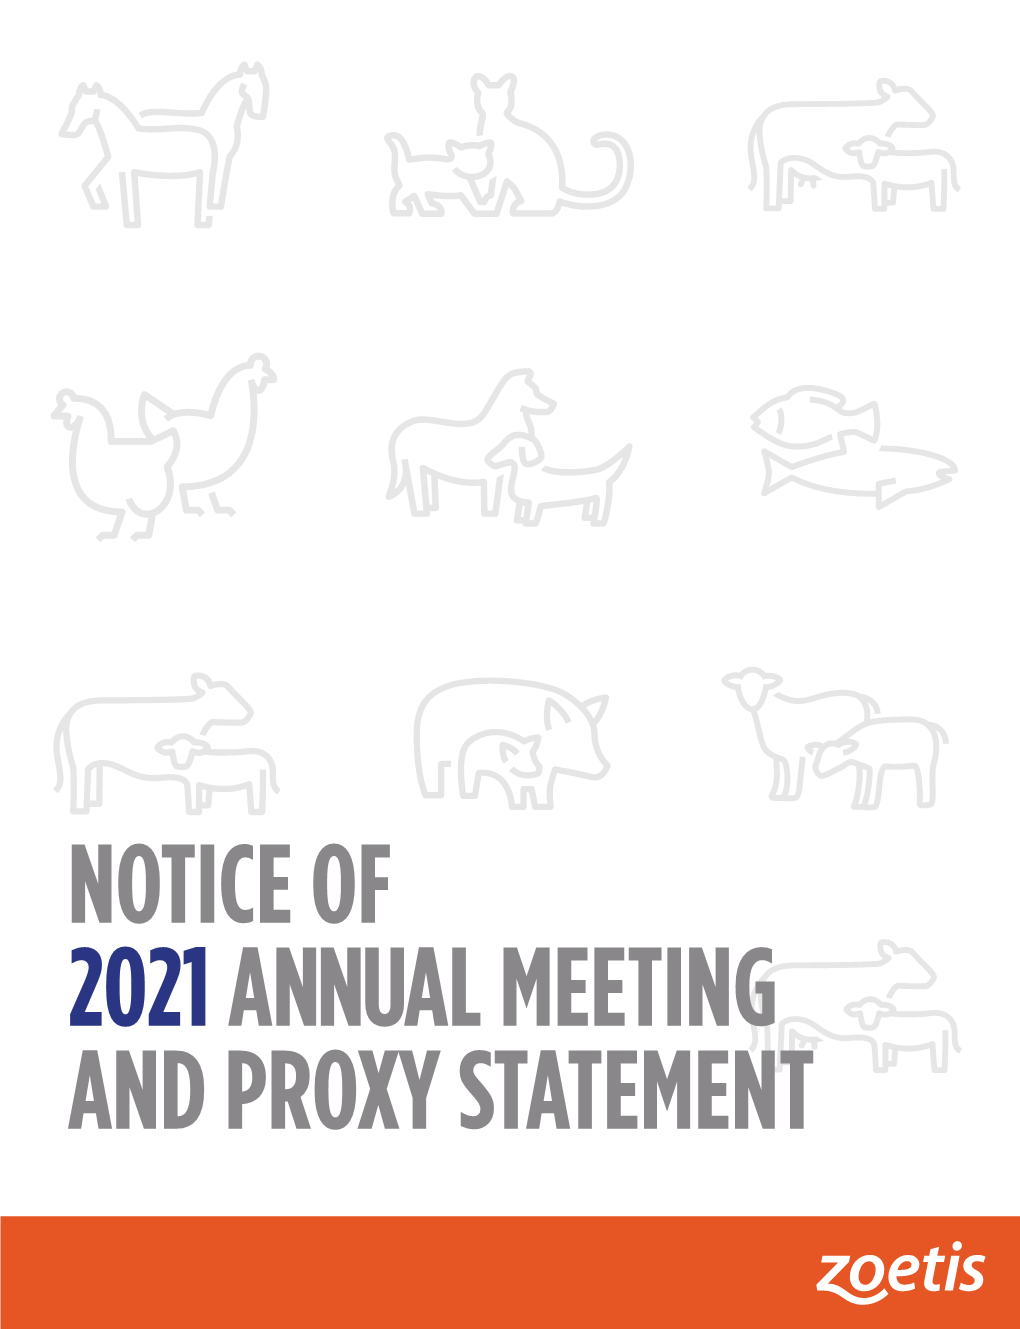 Notice of 2021 Annual Meeting and Proxy Statement